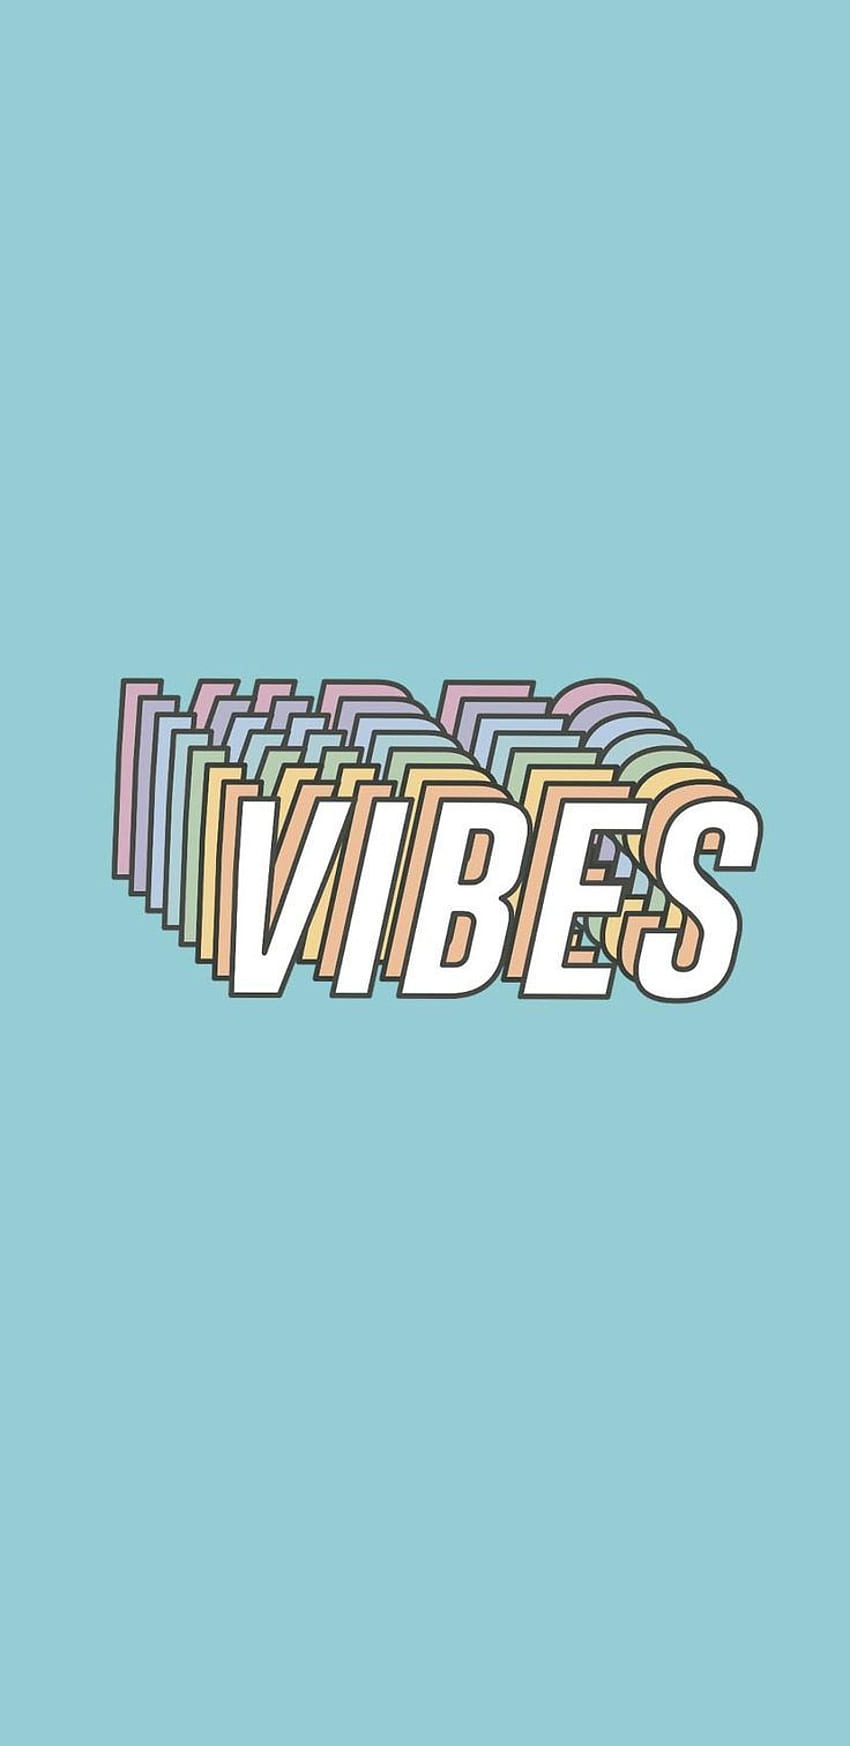 Only good vibes on a lazy day - HD phone wallpaper